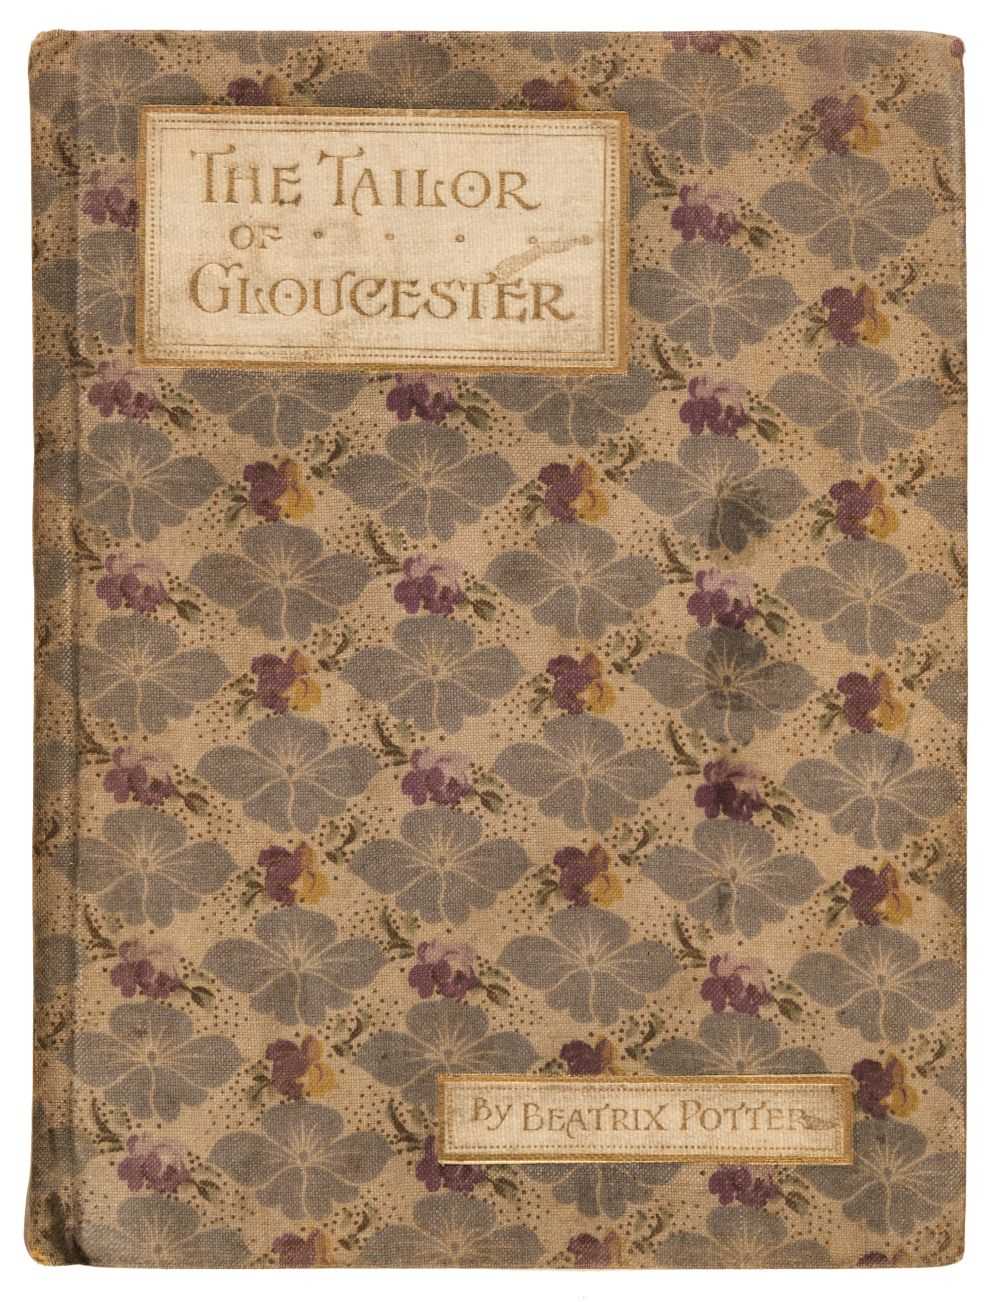 Lot 616 - Potter (Beatrix). The Tailor of Gloucester, 1st edition, deluxe issue, 1903